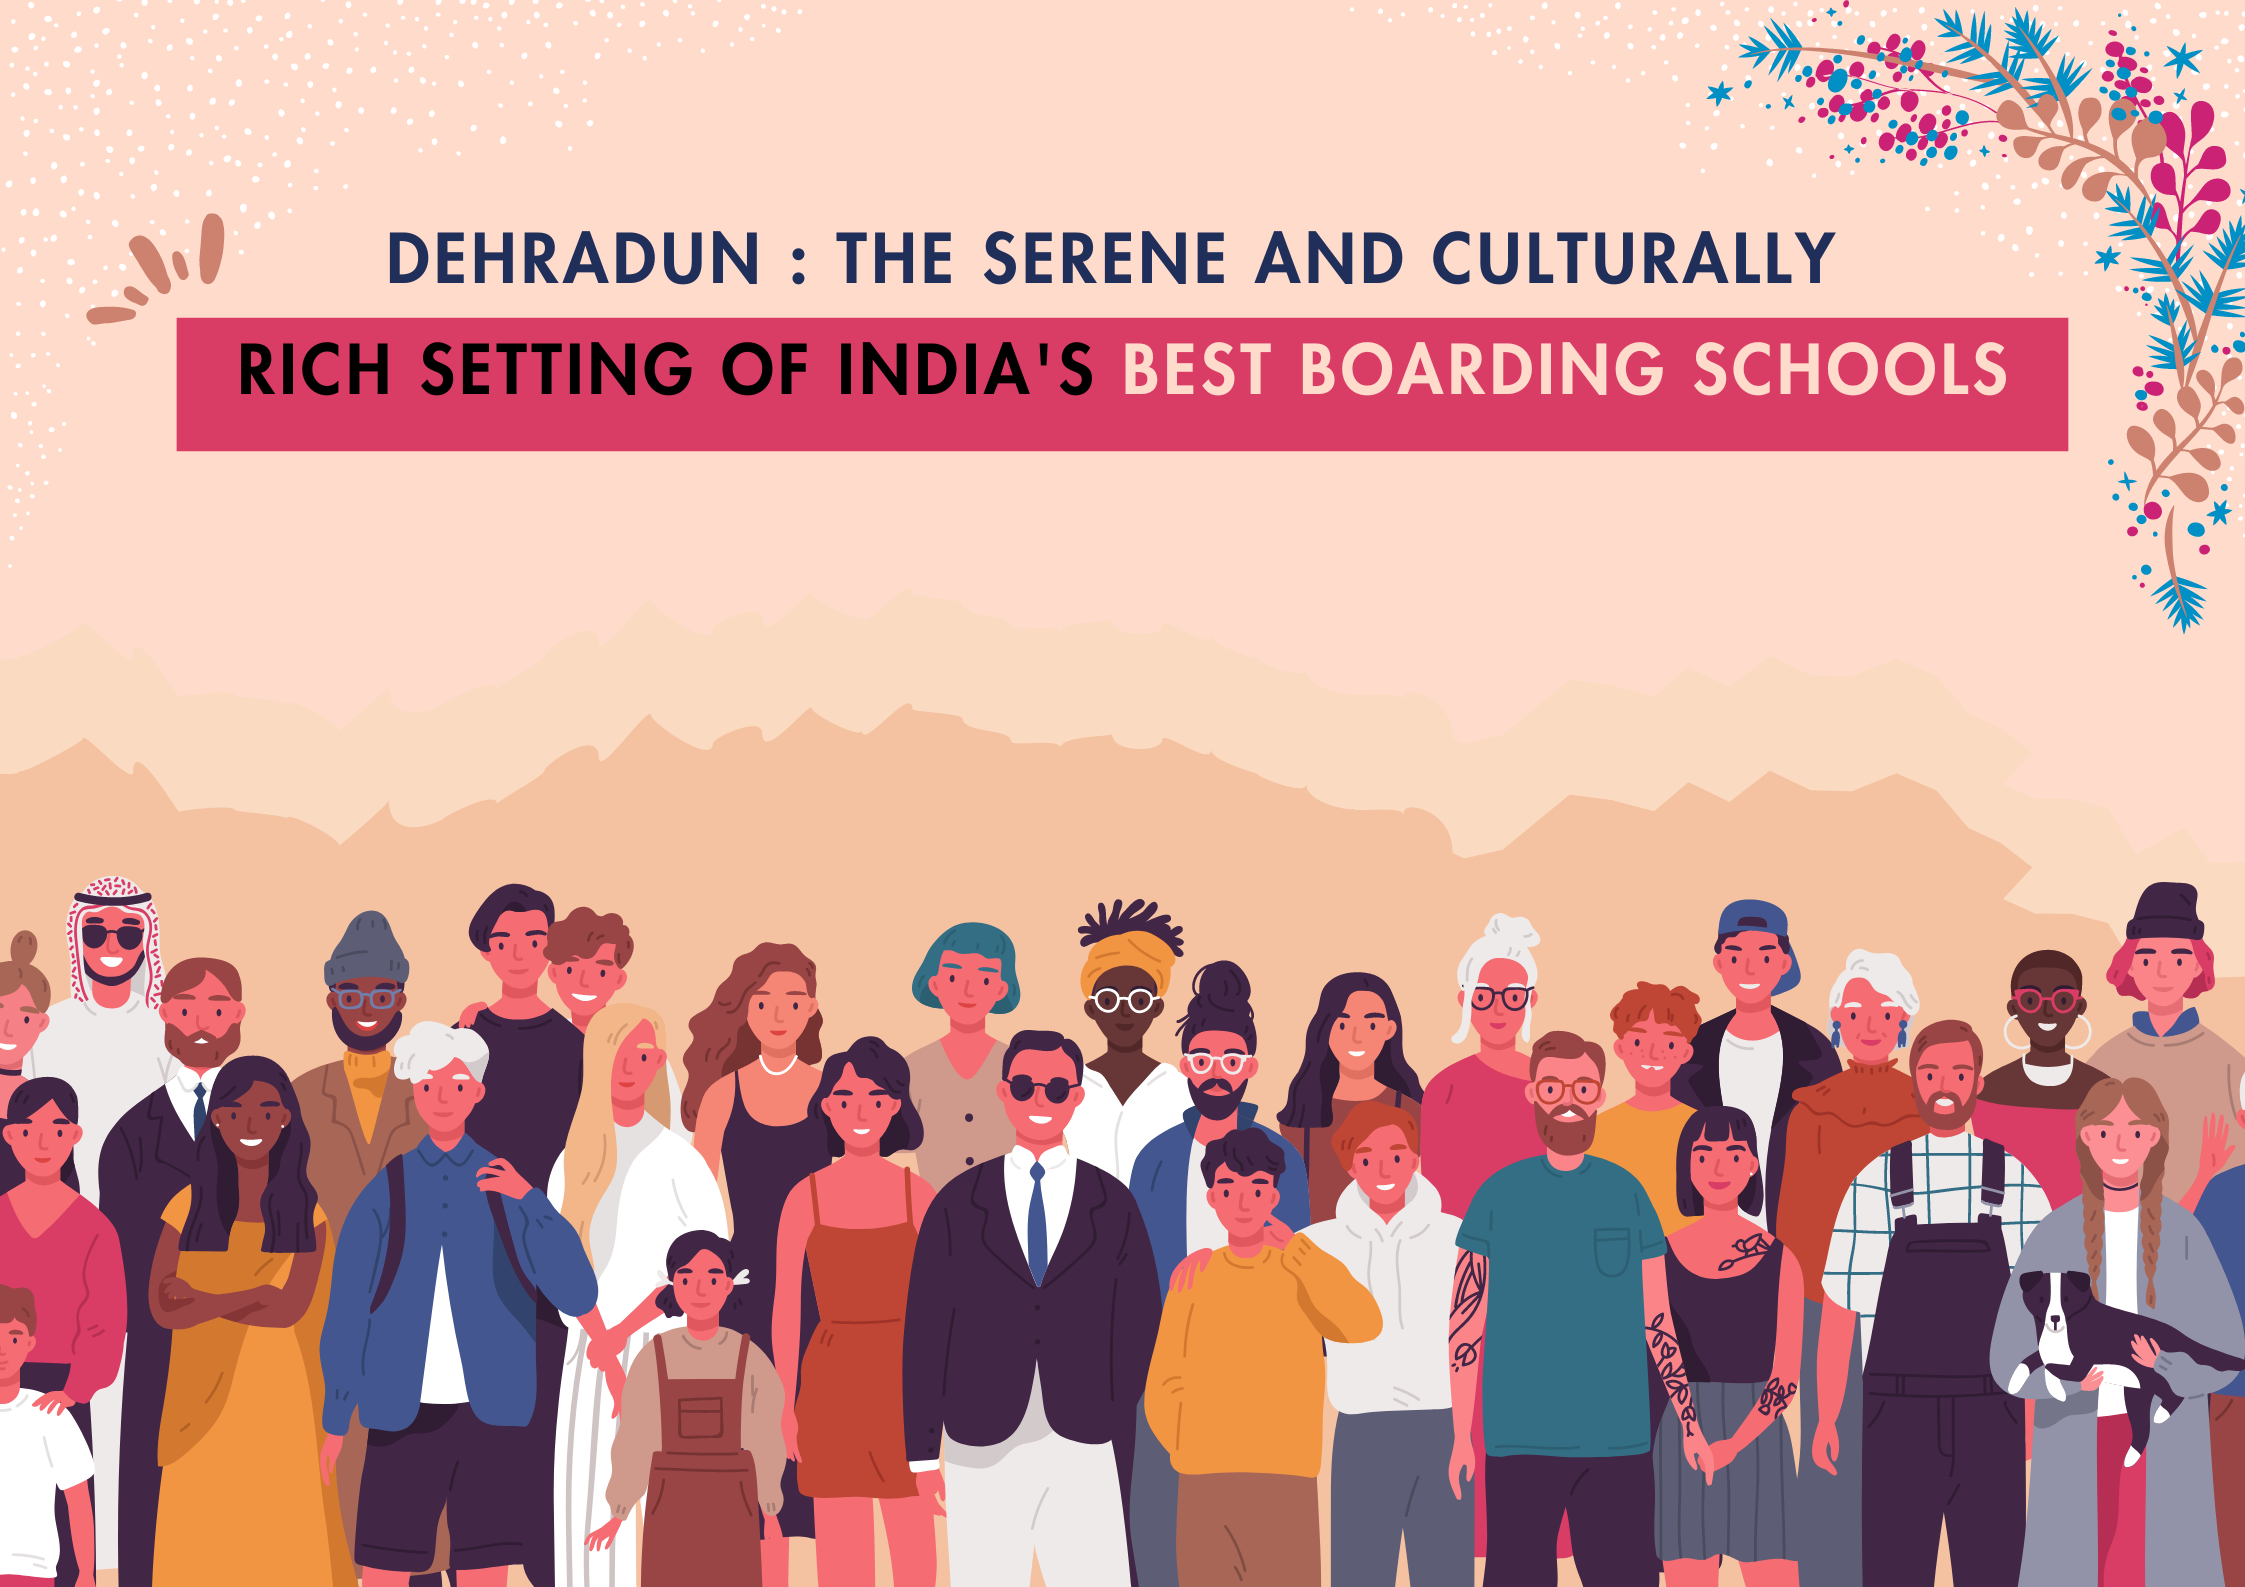 You are currently viewing Dehradun : The Serene and Culturally Rich Setting of India’s Best Boarding Schools